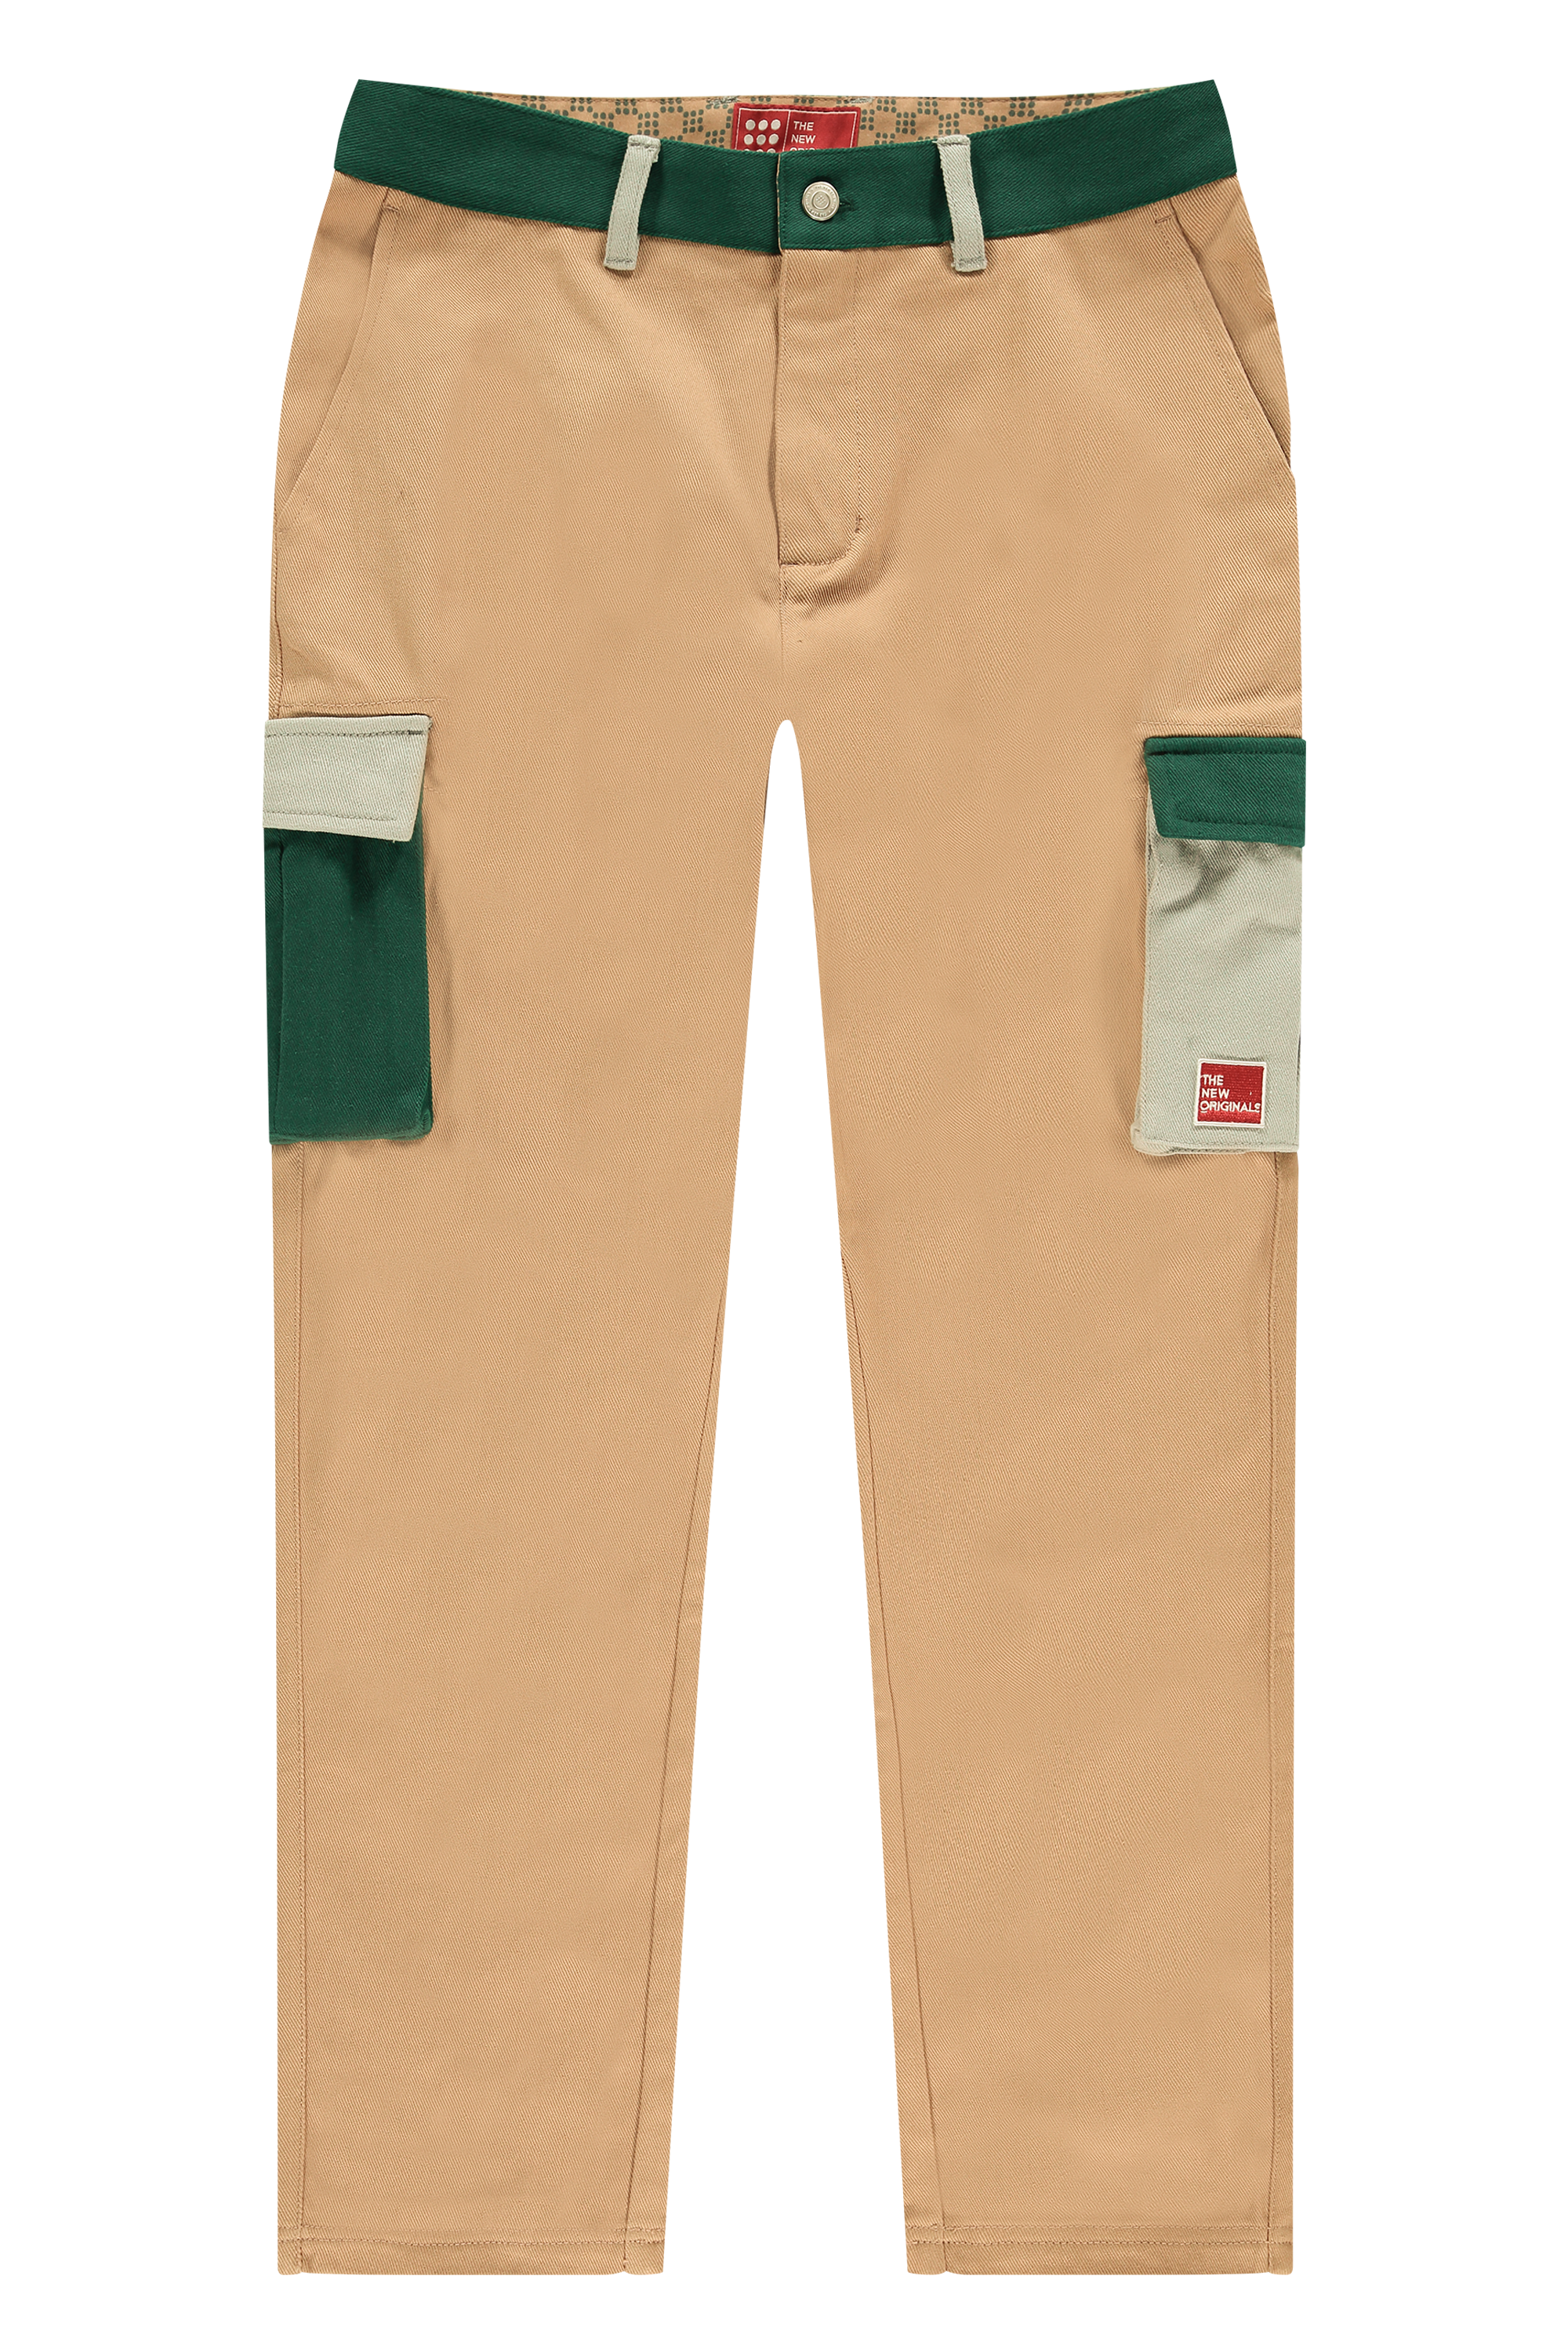 products-pants_creamgreen_front-png